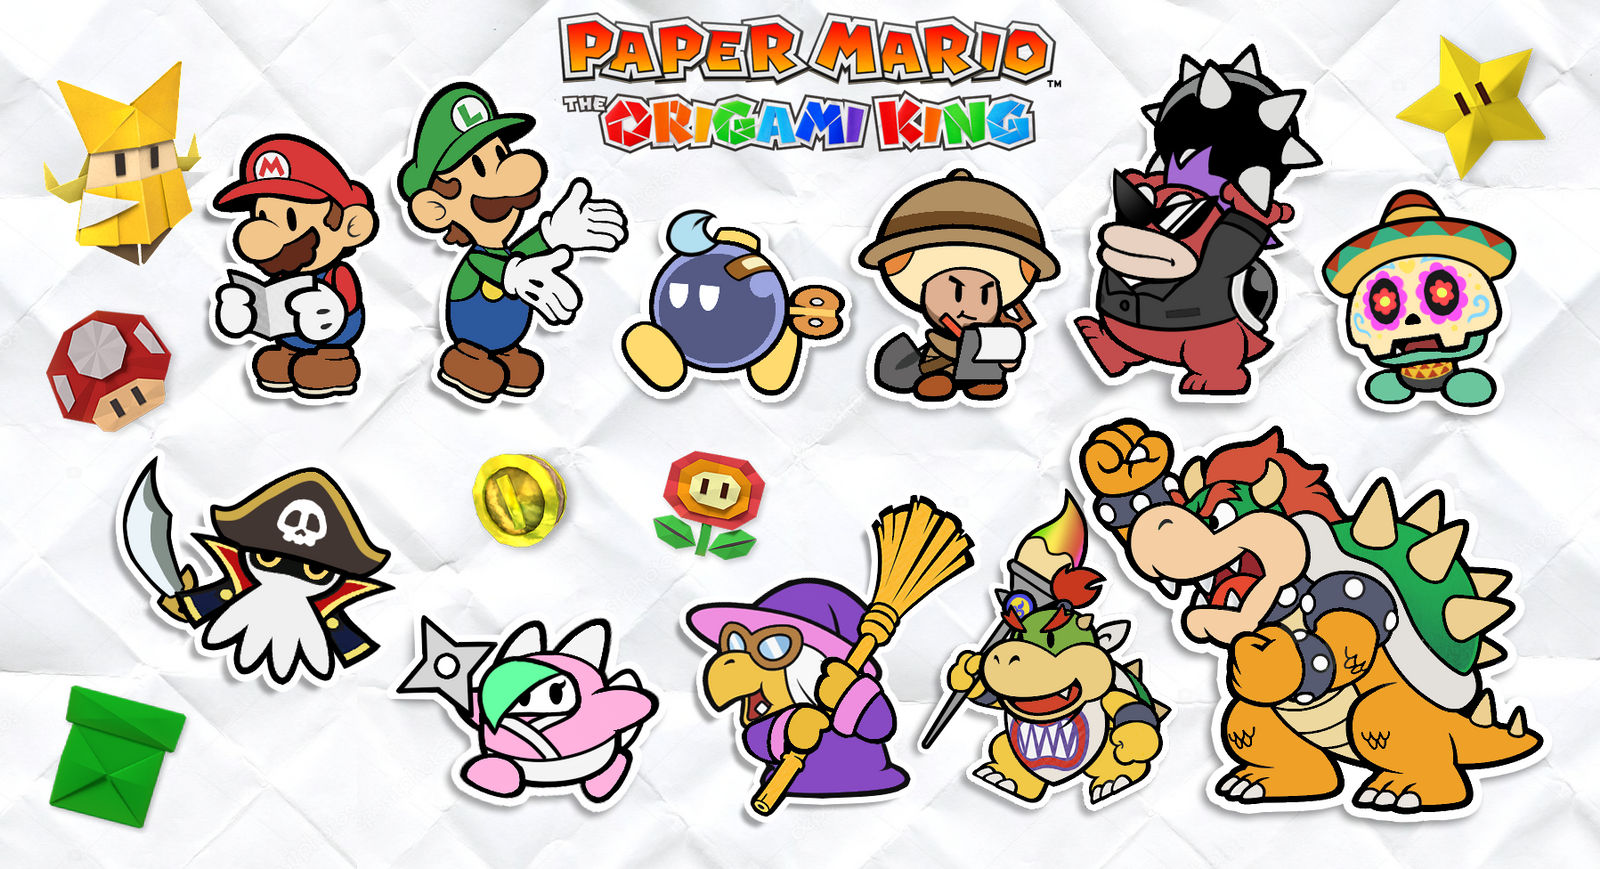 Paper Mario The Origami King Reimagined Partners by Zieghost on